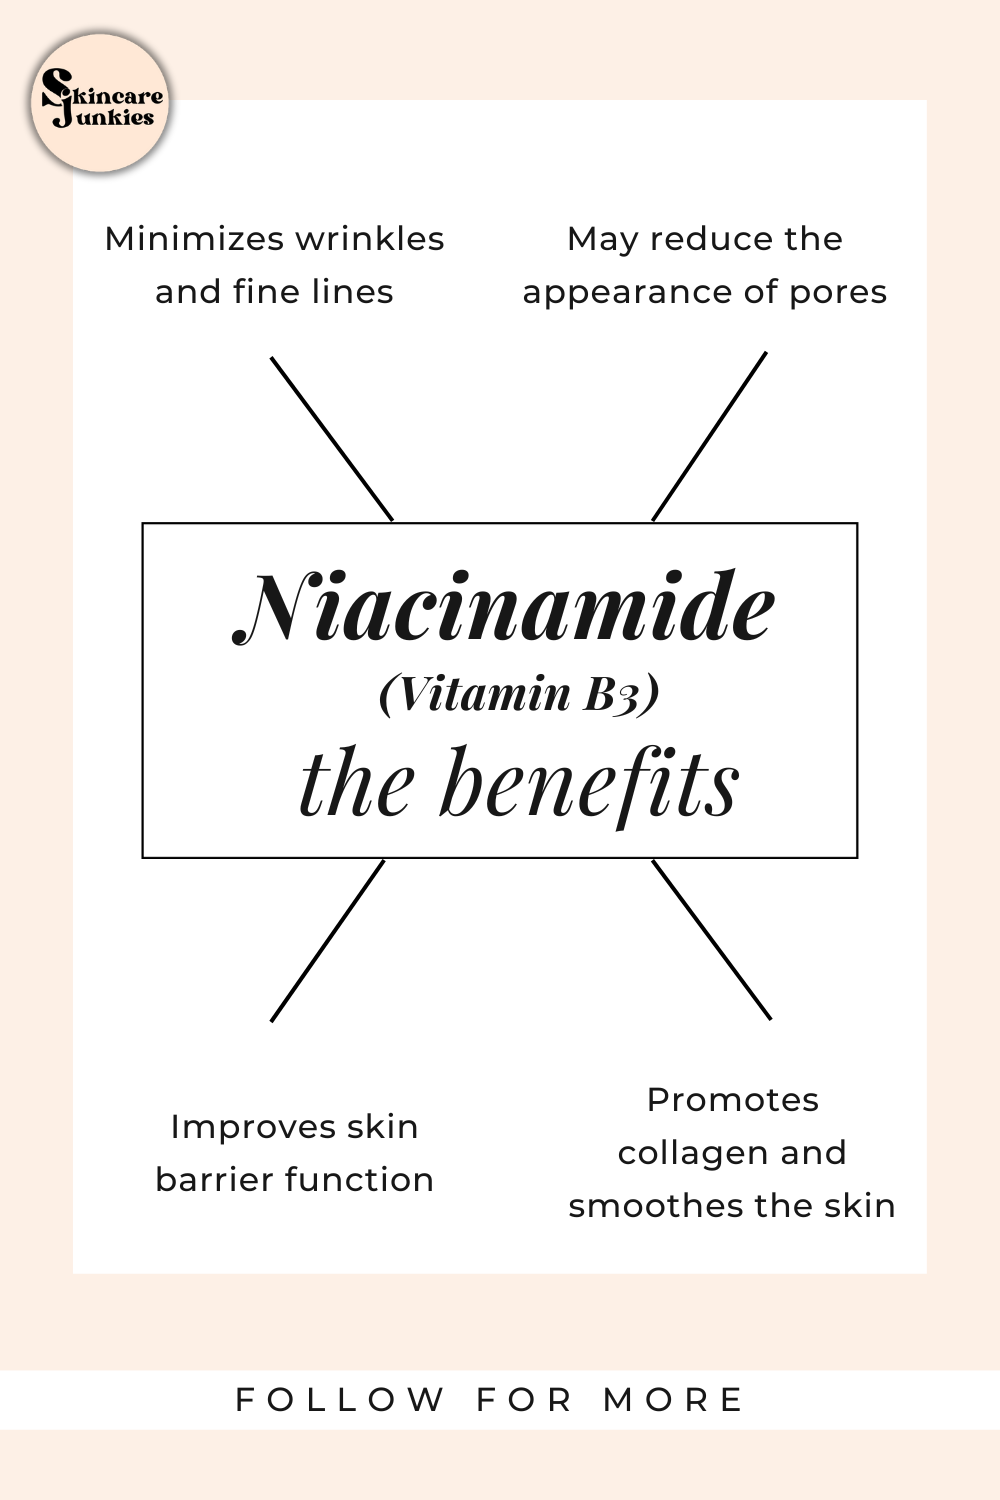 What Are the Top Niacinamide Benefits for Skin?